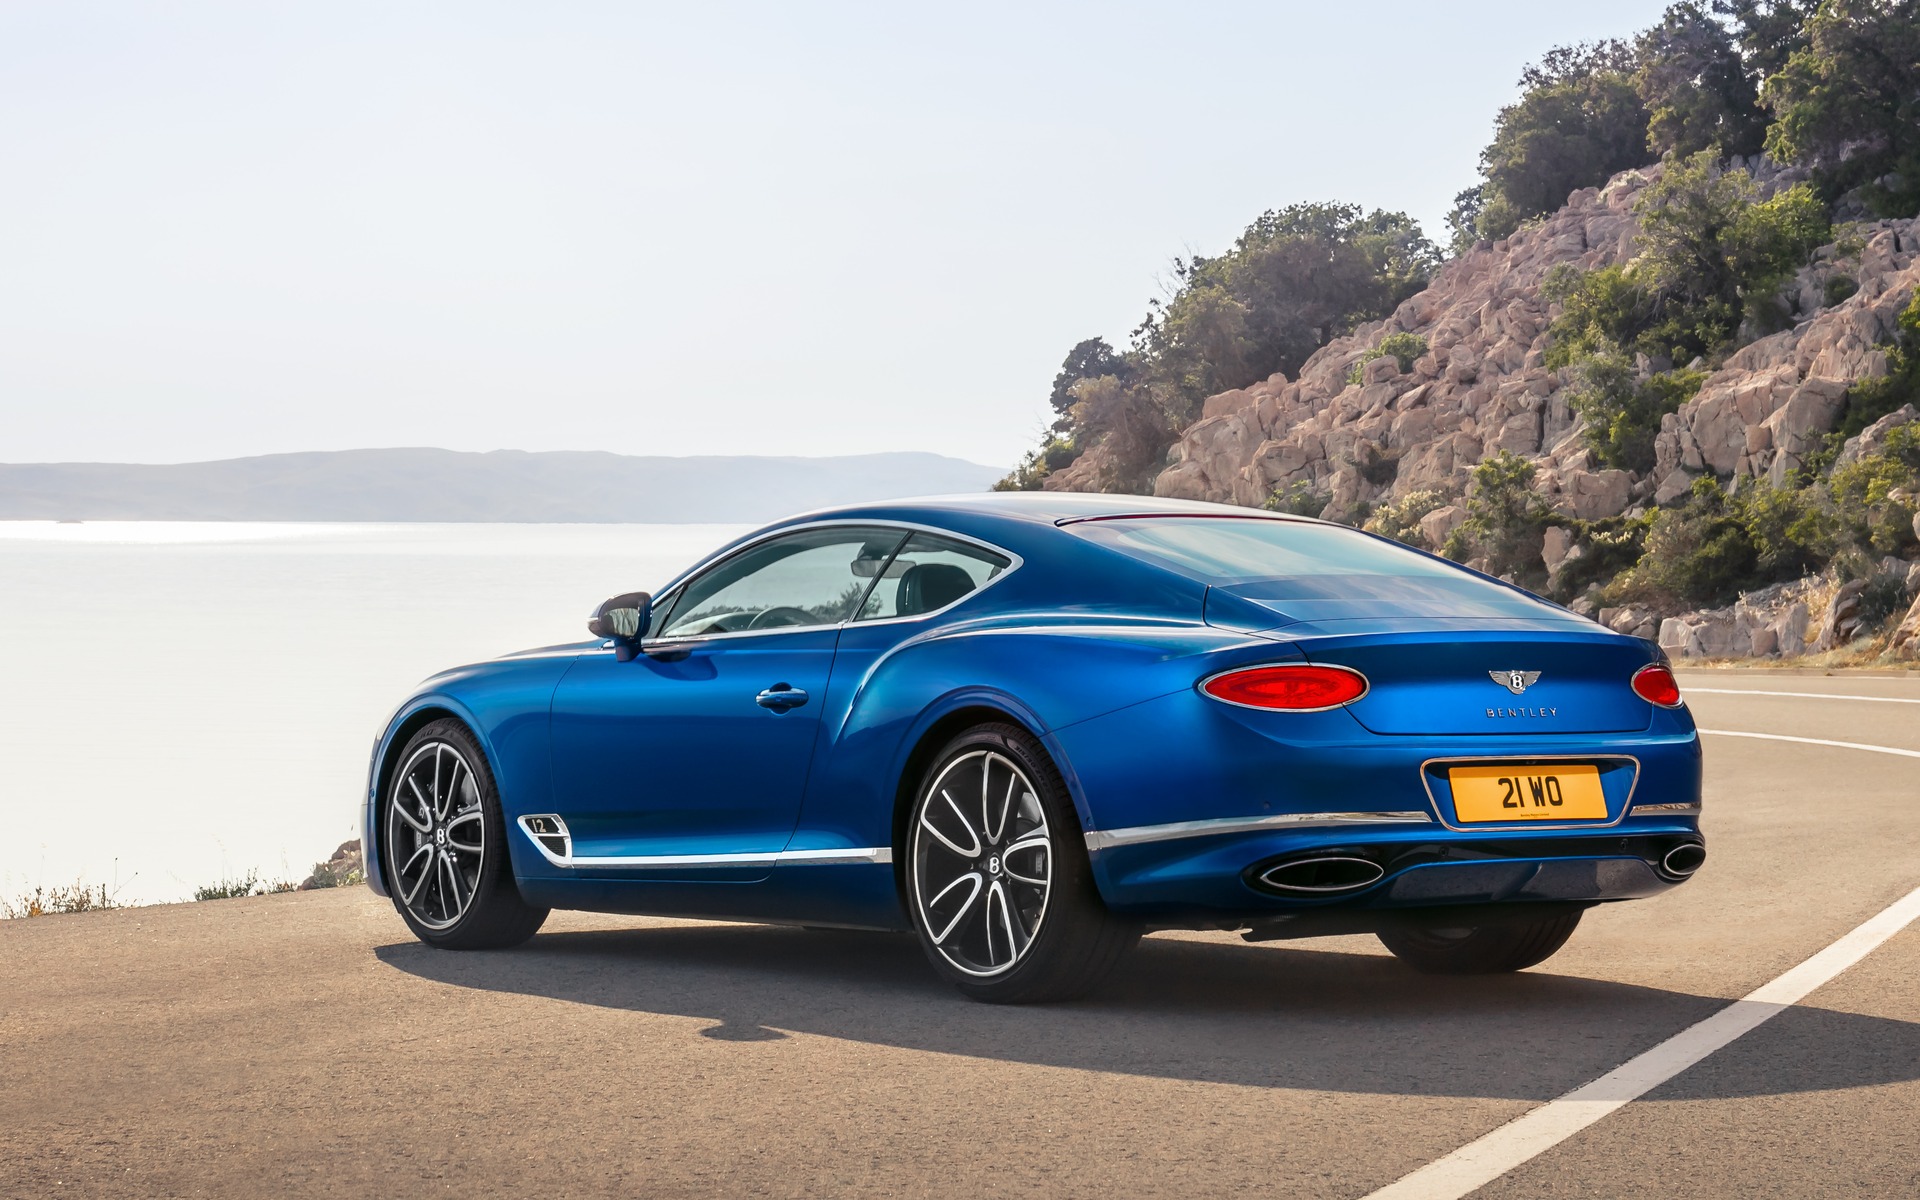 2018 Bentley Continental GT Revealed - The Car Guide